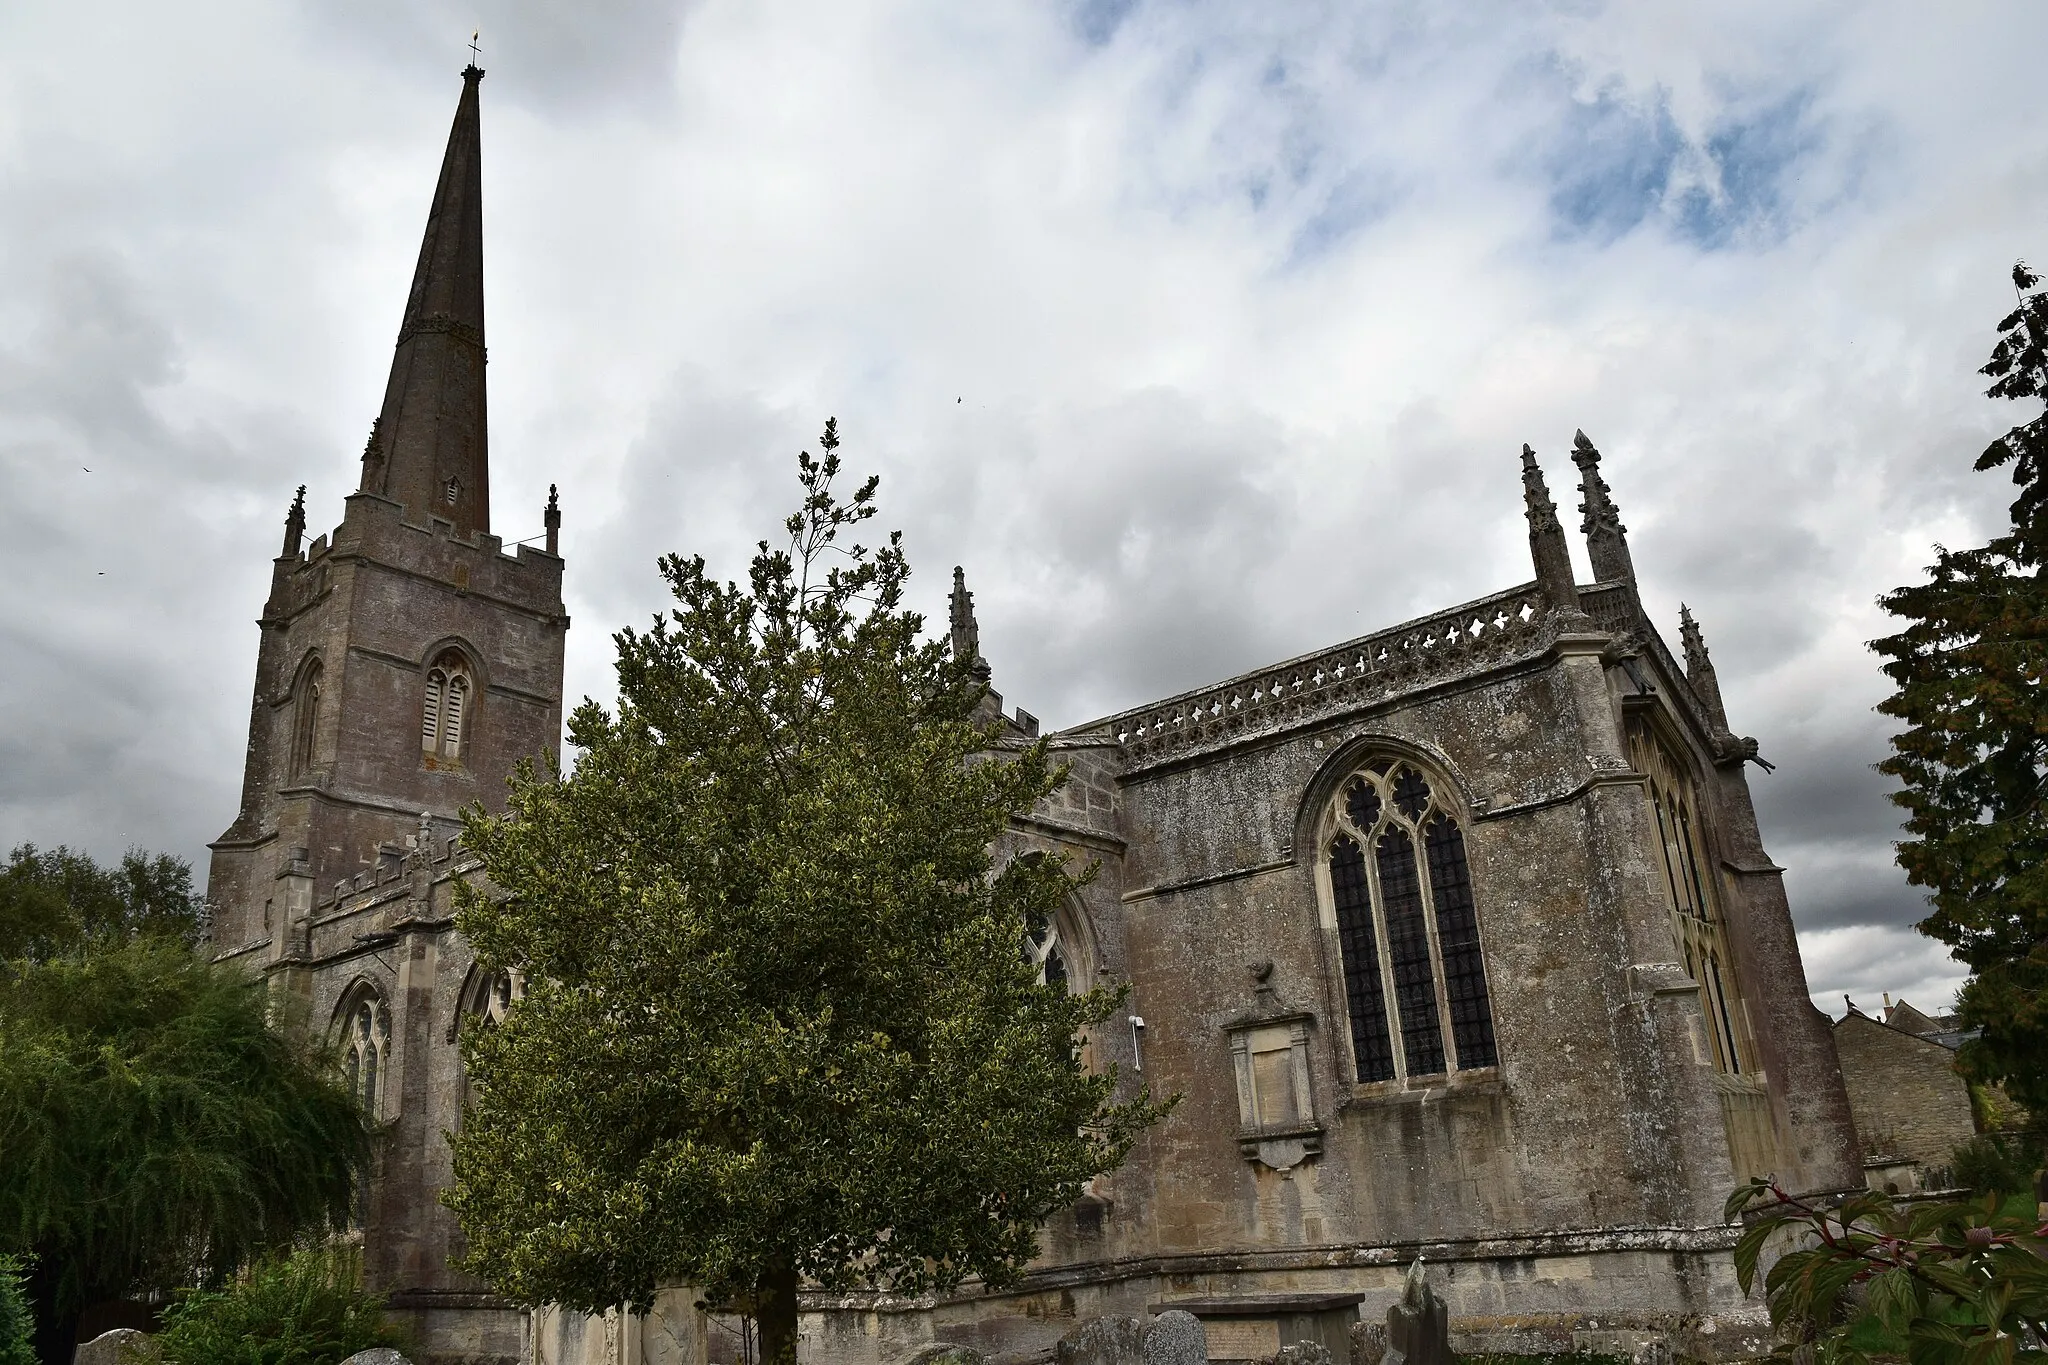 Photo showing: Lechlade Church (Saint Lawrence), Gloucestershire, 6 September 2018. Perpendicular, 15th Century naver and chancel (1470-76), early 16th Century nave clerestory and roof, north porch, tower and spire. Pictured is the south elevation.